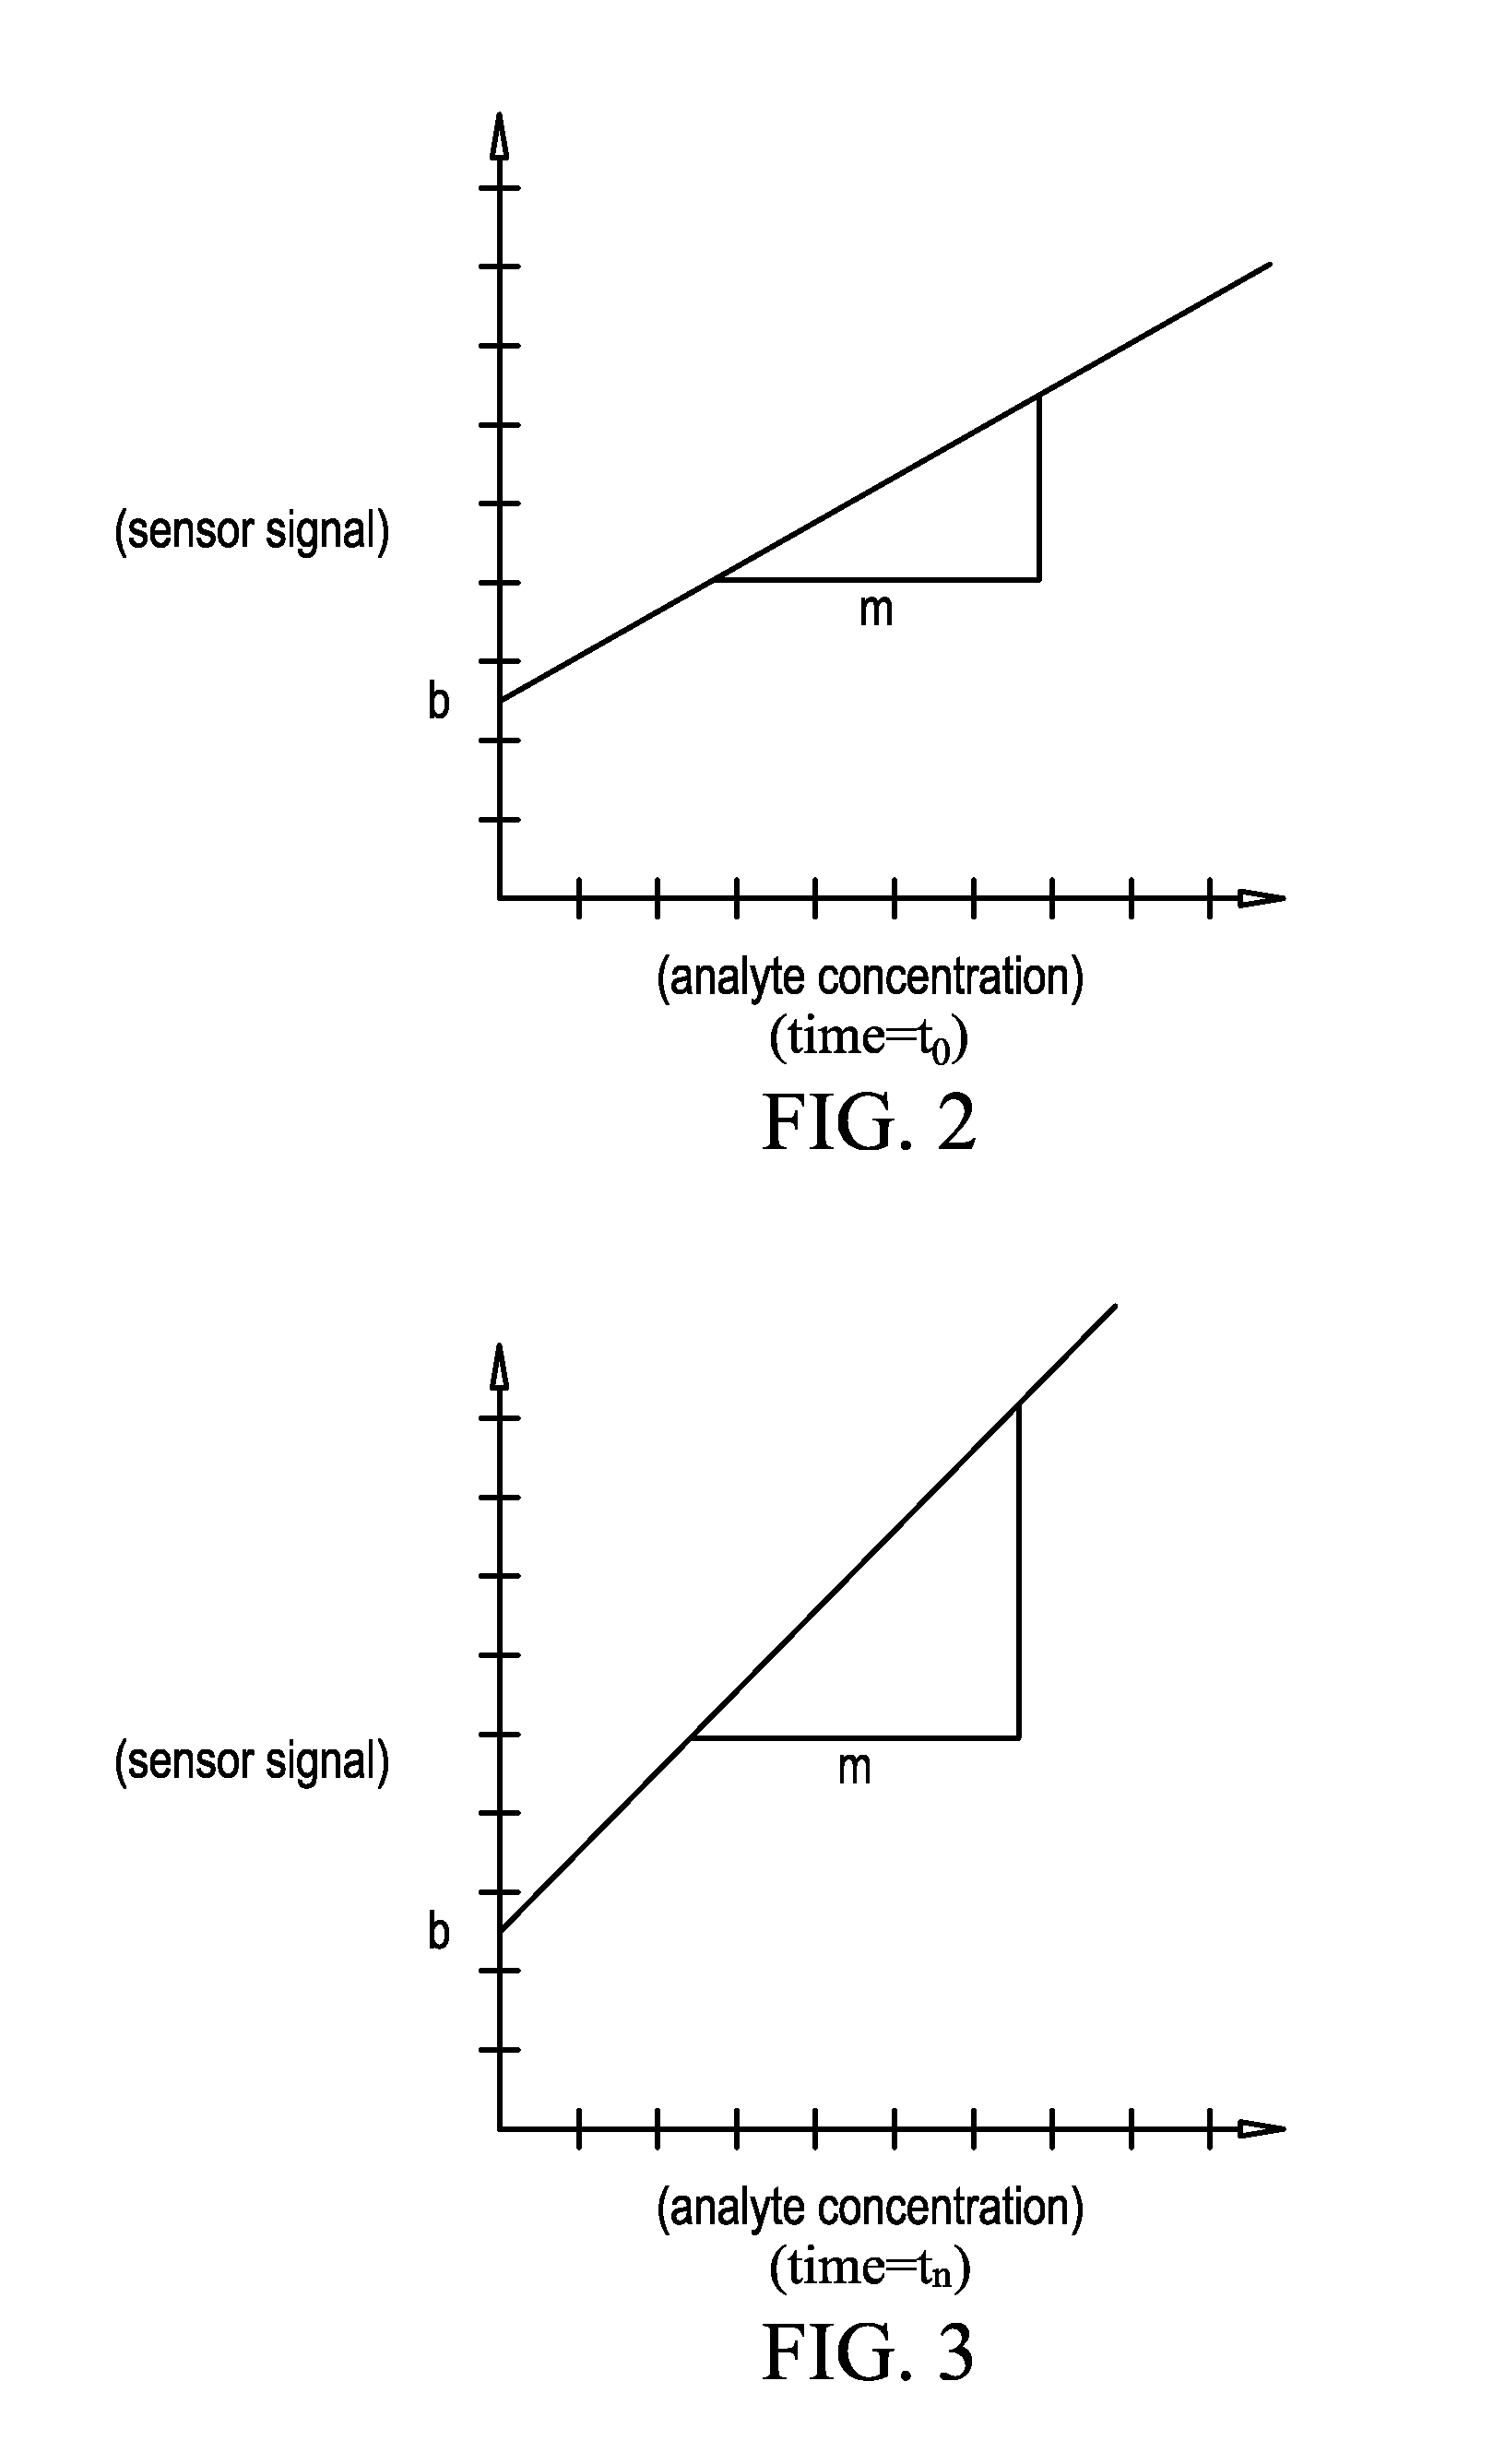 Systems and methods for processing analyte sensor data